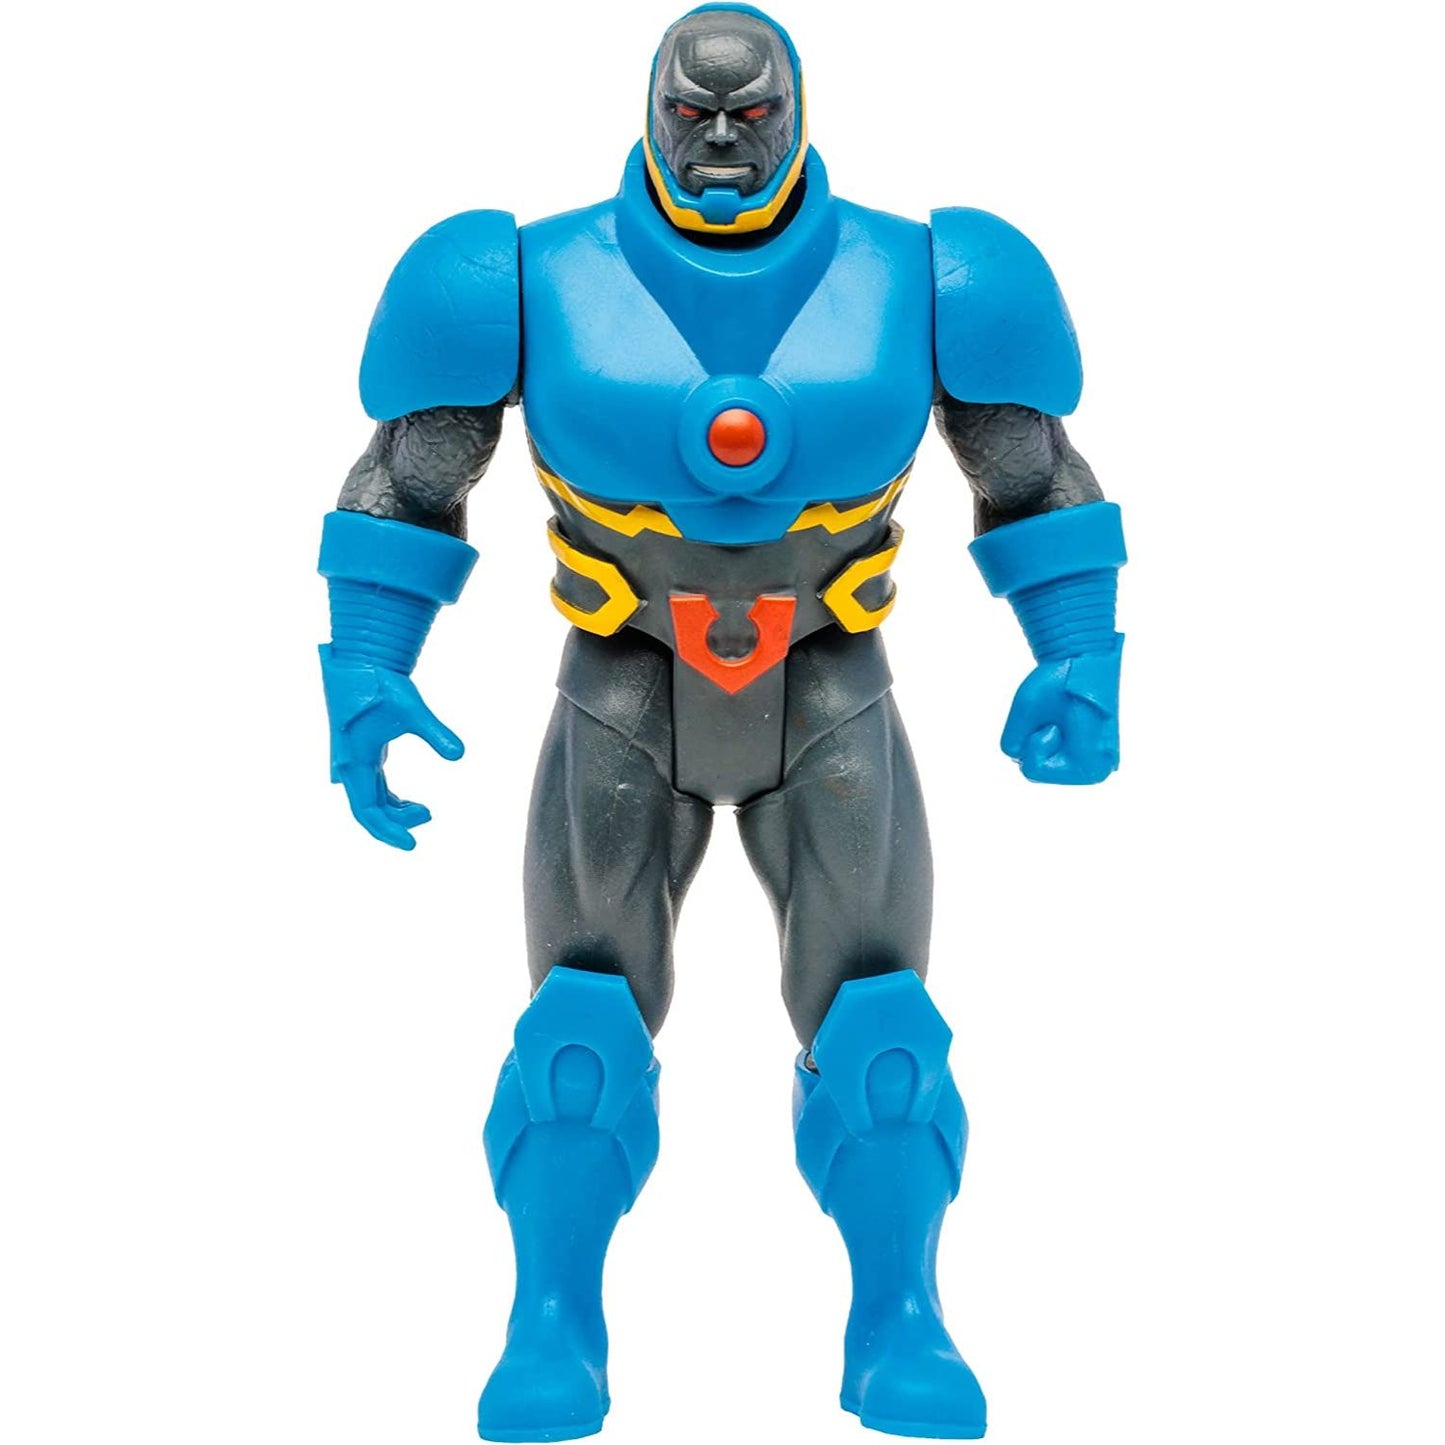 DC Direct - Super Powers - Darkseid Action Figure Toy - Heretoserveyou